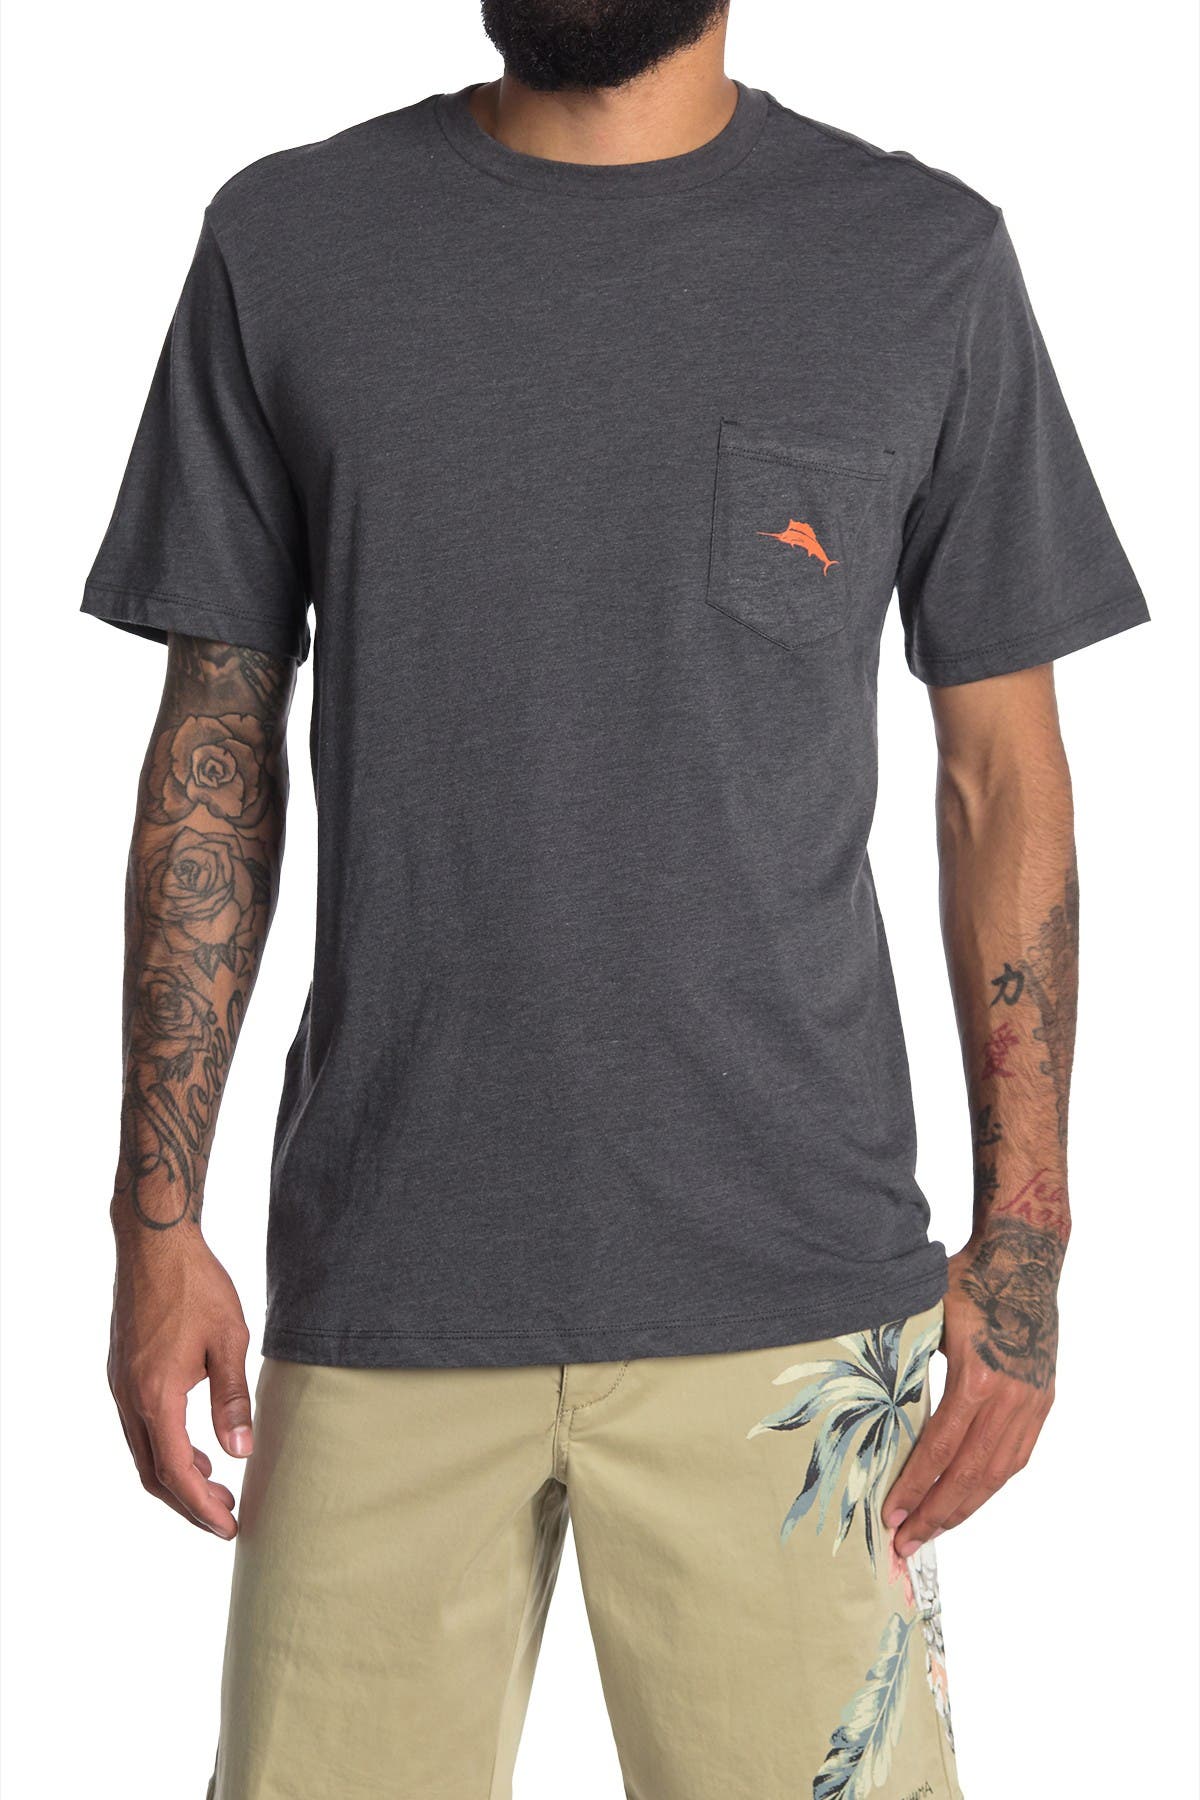 TOMMY BAHAMA CAN'T HANDLE VERMOUTH POCKET T-SHIRT,755633380509